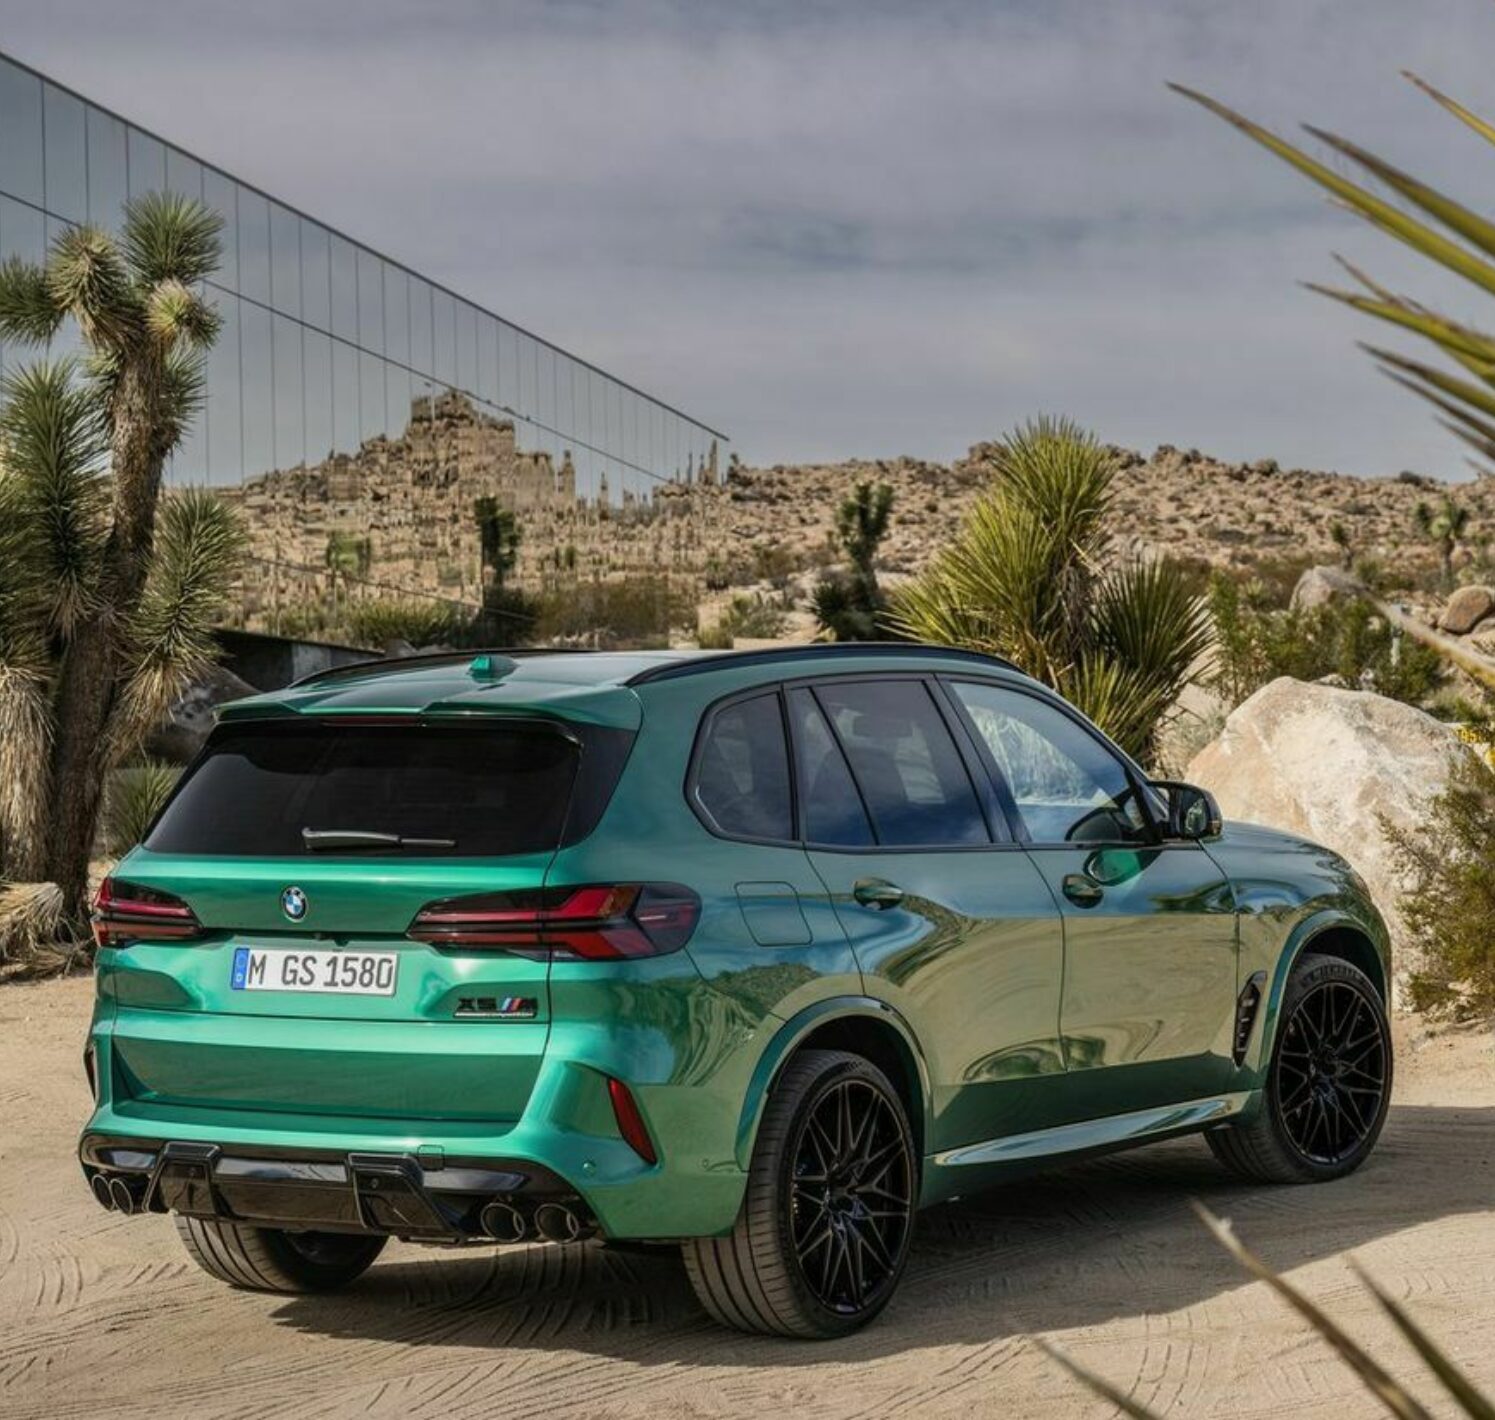 https://autofilter.sk/assets/images/x5/gallery/bmw-x5-m-competition-4-galeria.jpg - obrazok